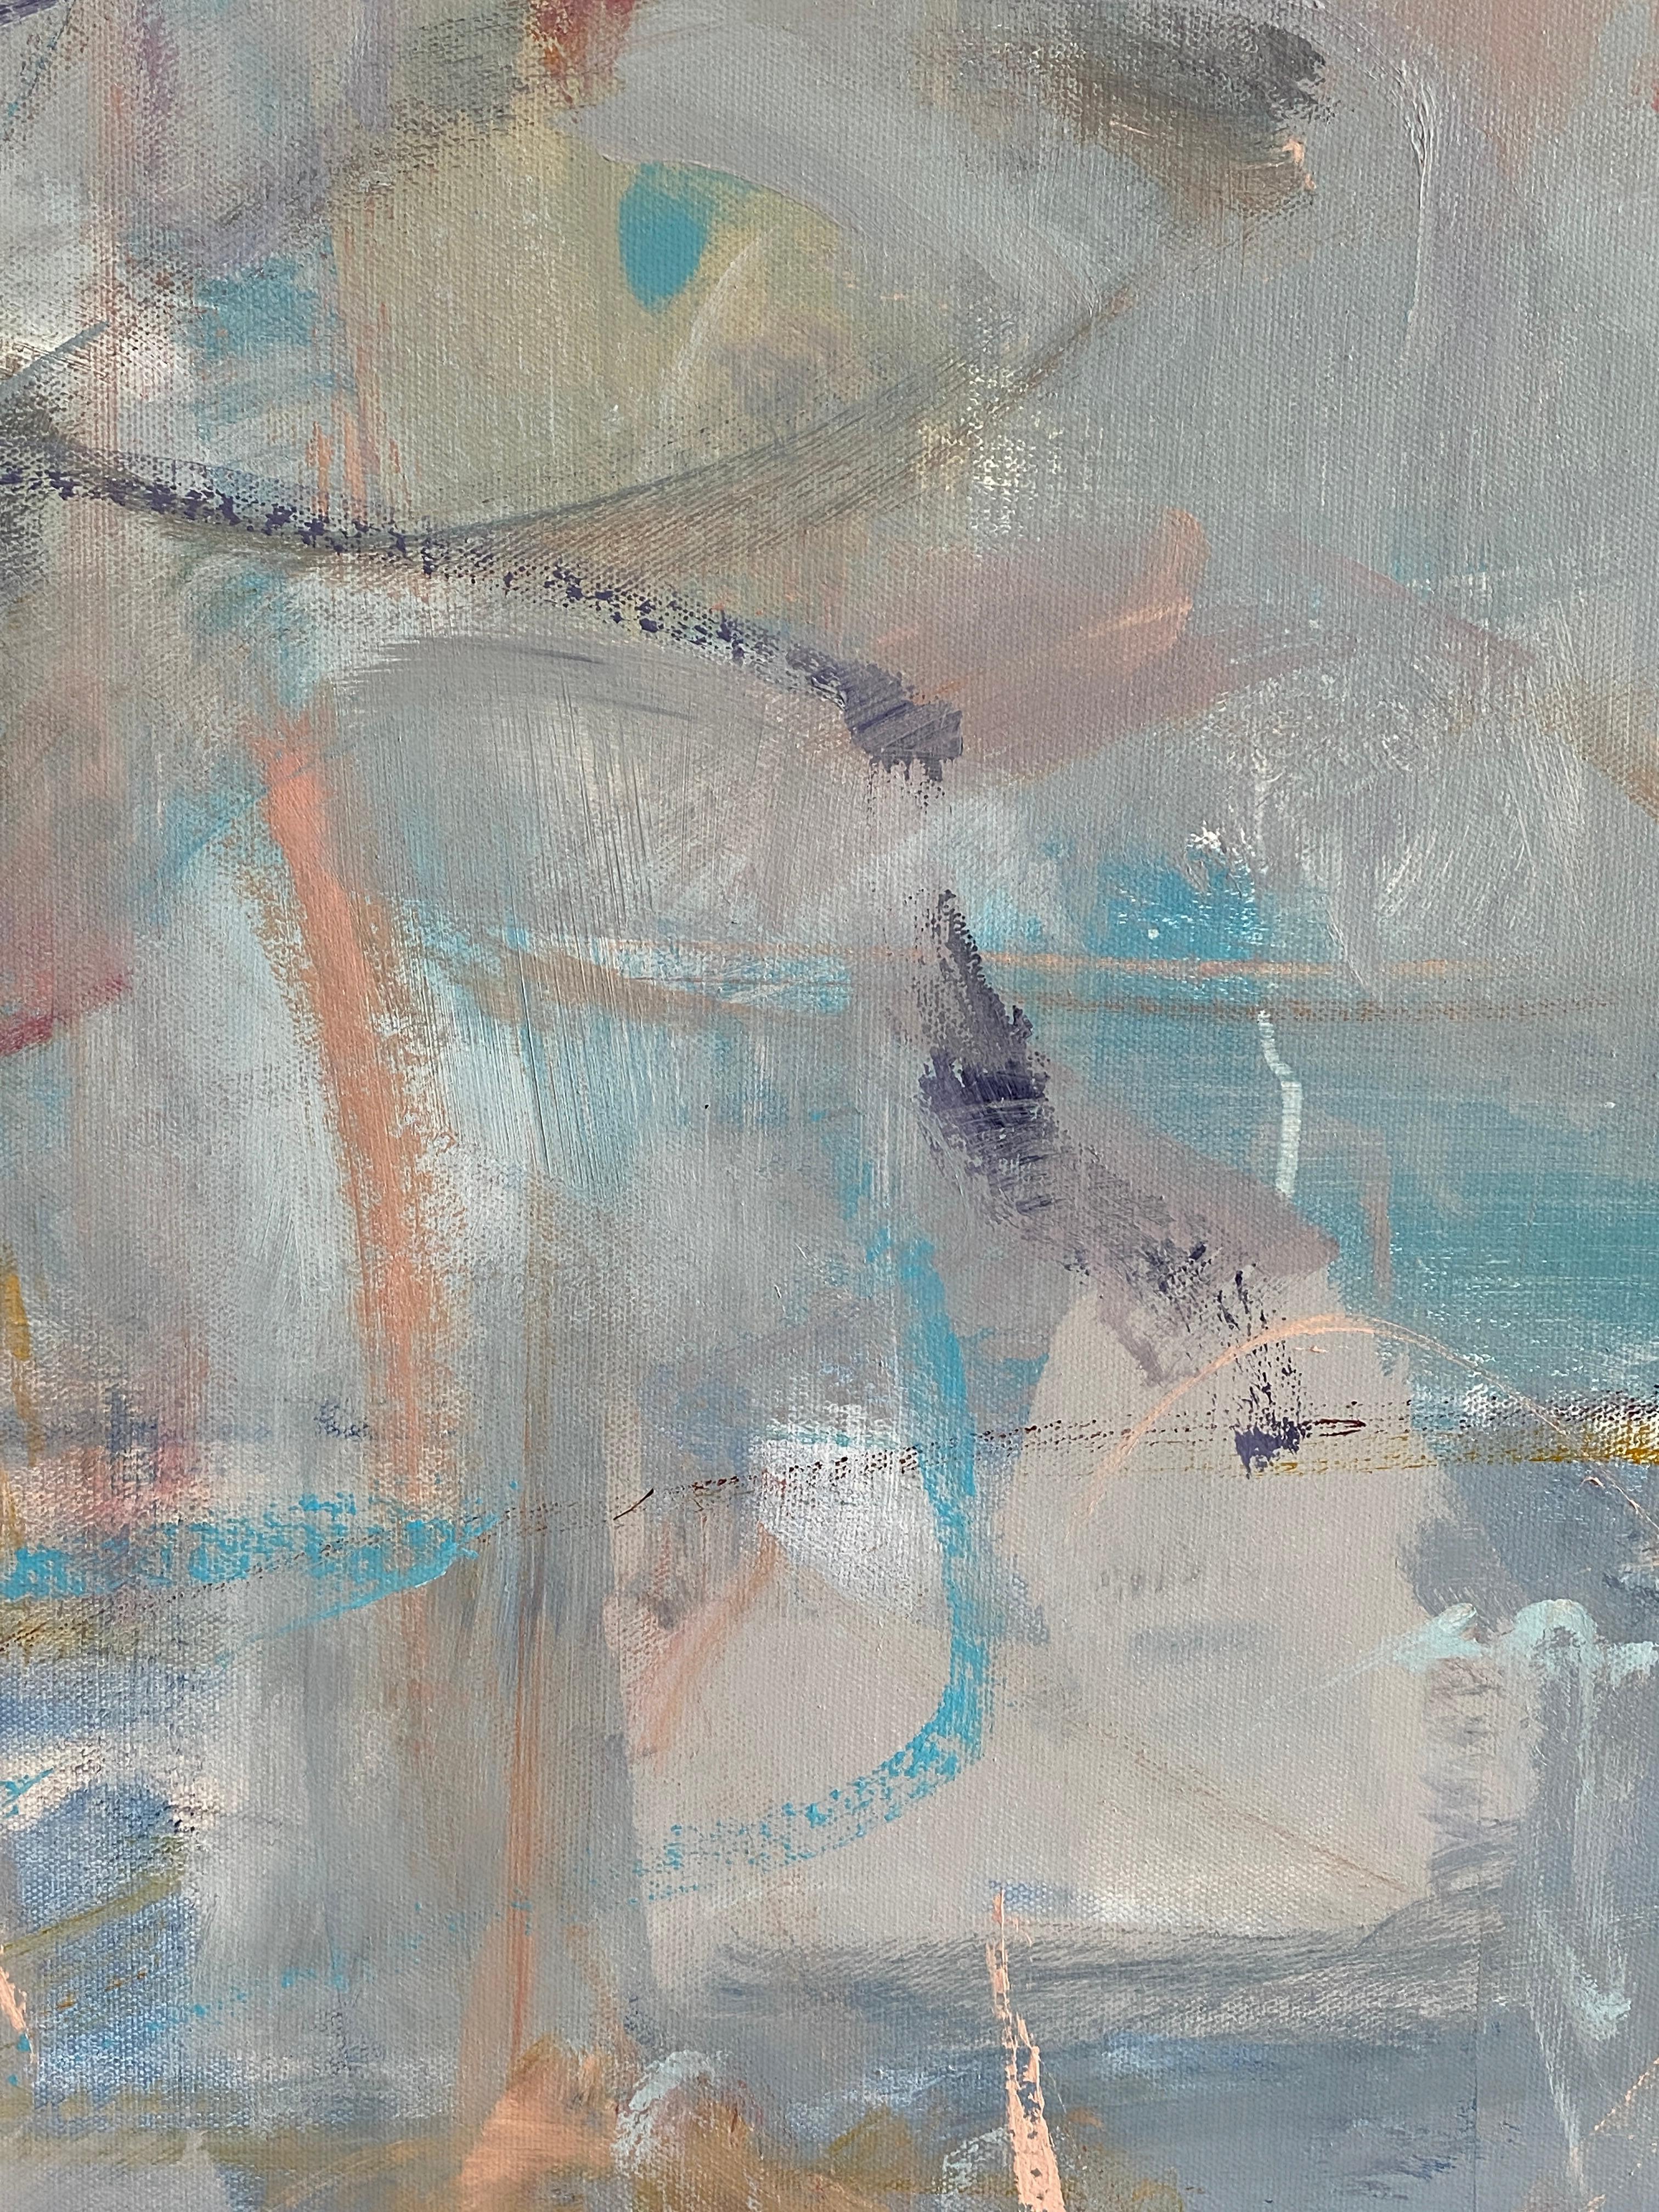 Sea Creatures, Abstract Seascape Painting, Acrylic on Canvas, Signed  - Gray Abstract Painting by Kim Romero